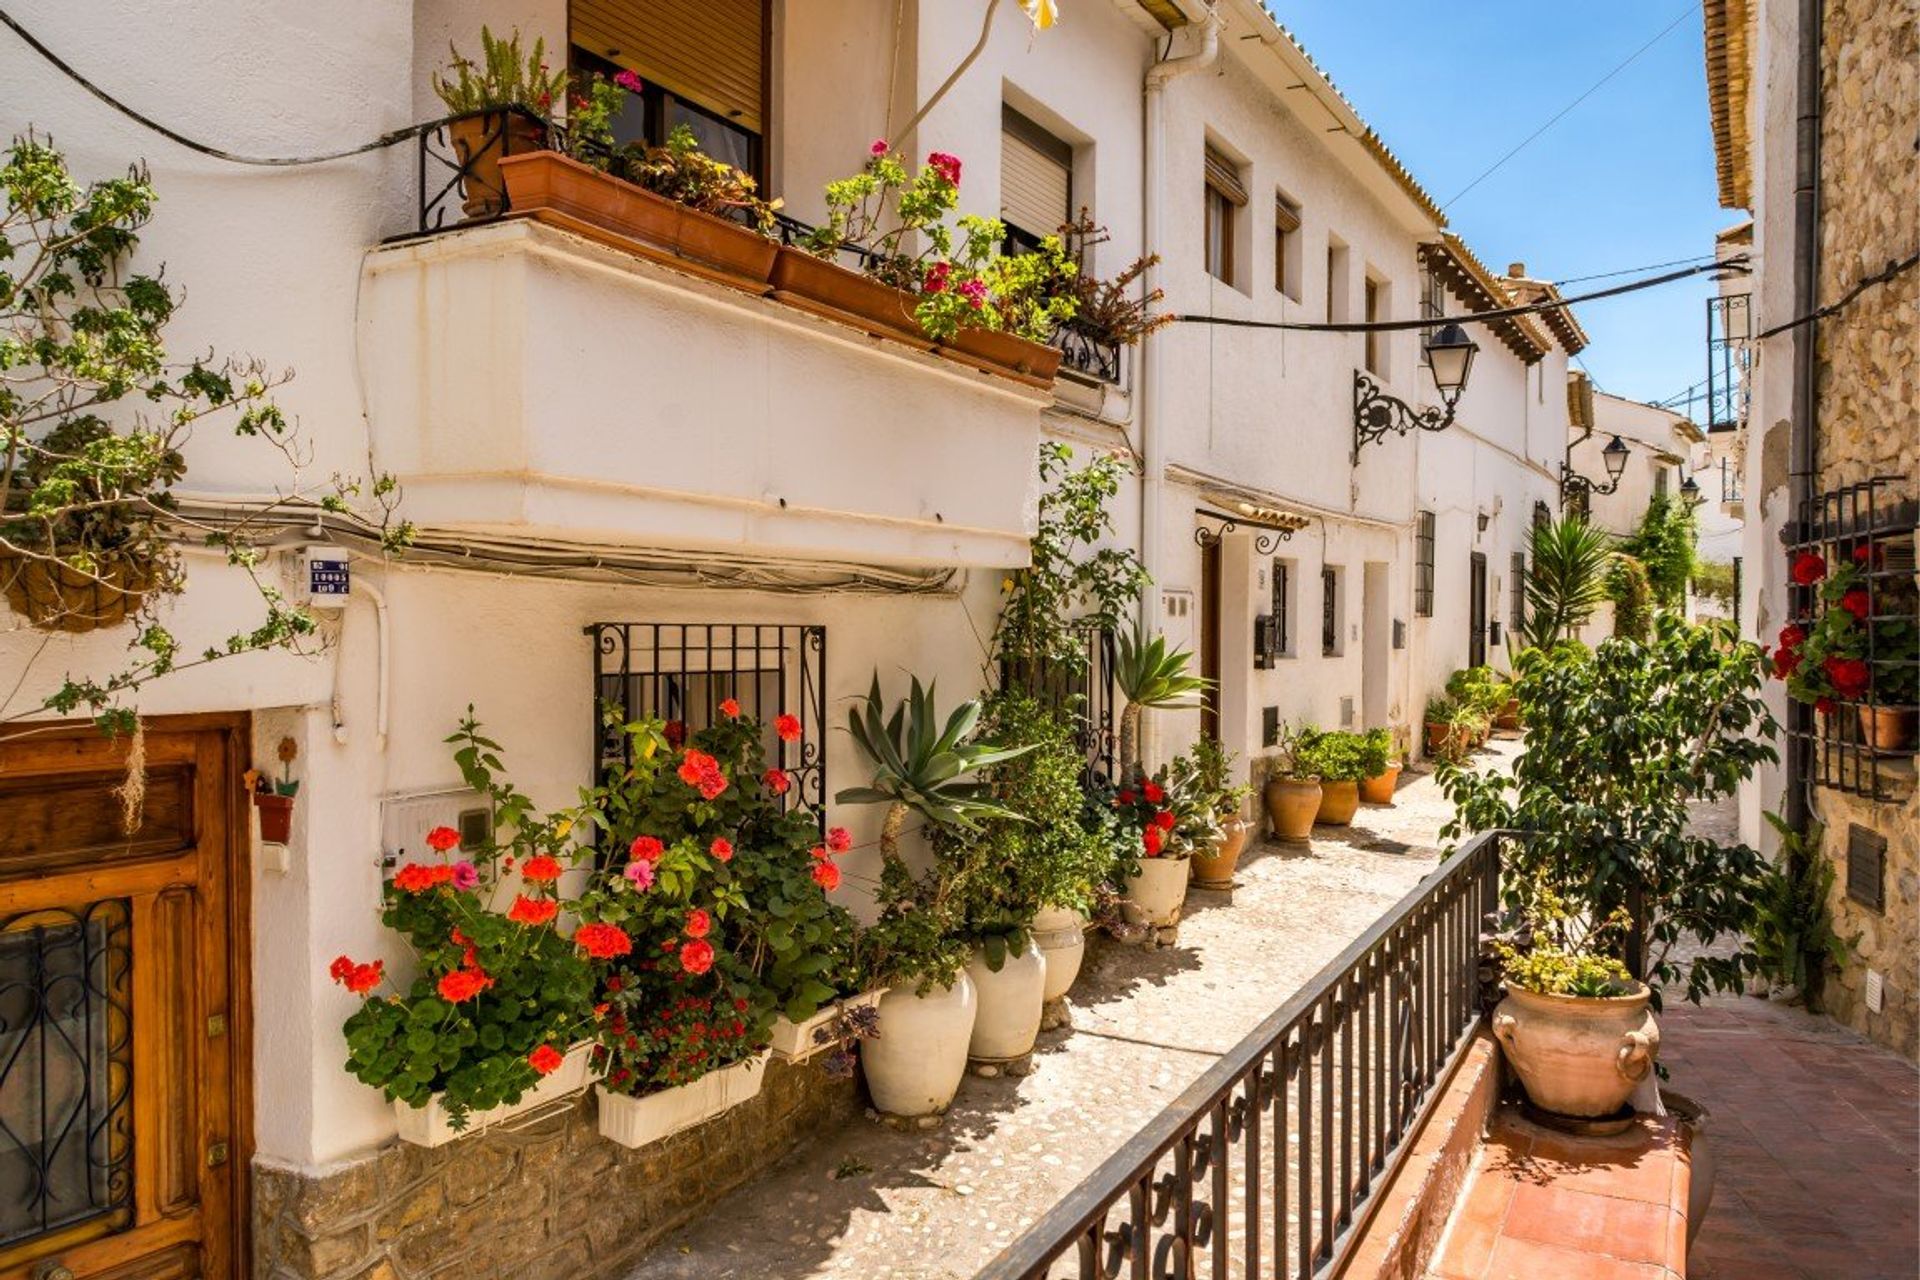 Altea is known for being one of the most traditional Spanish towns in the Costa Blanca